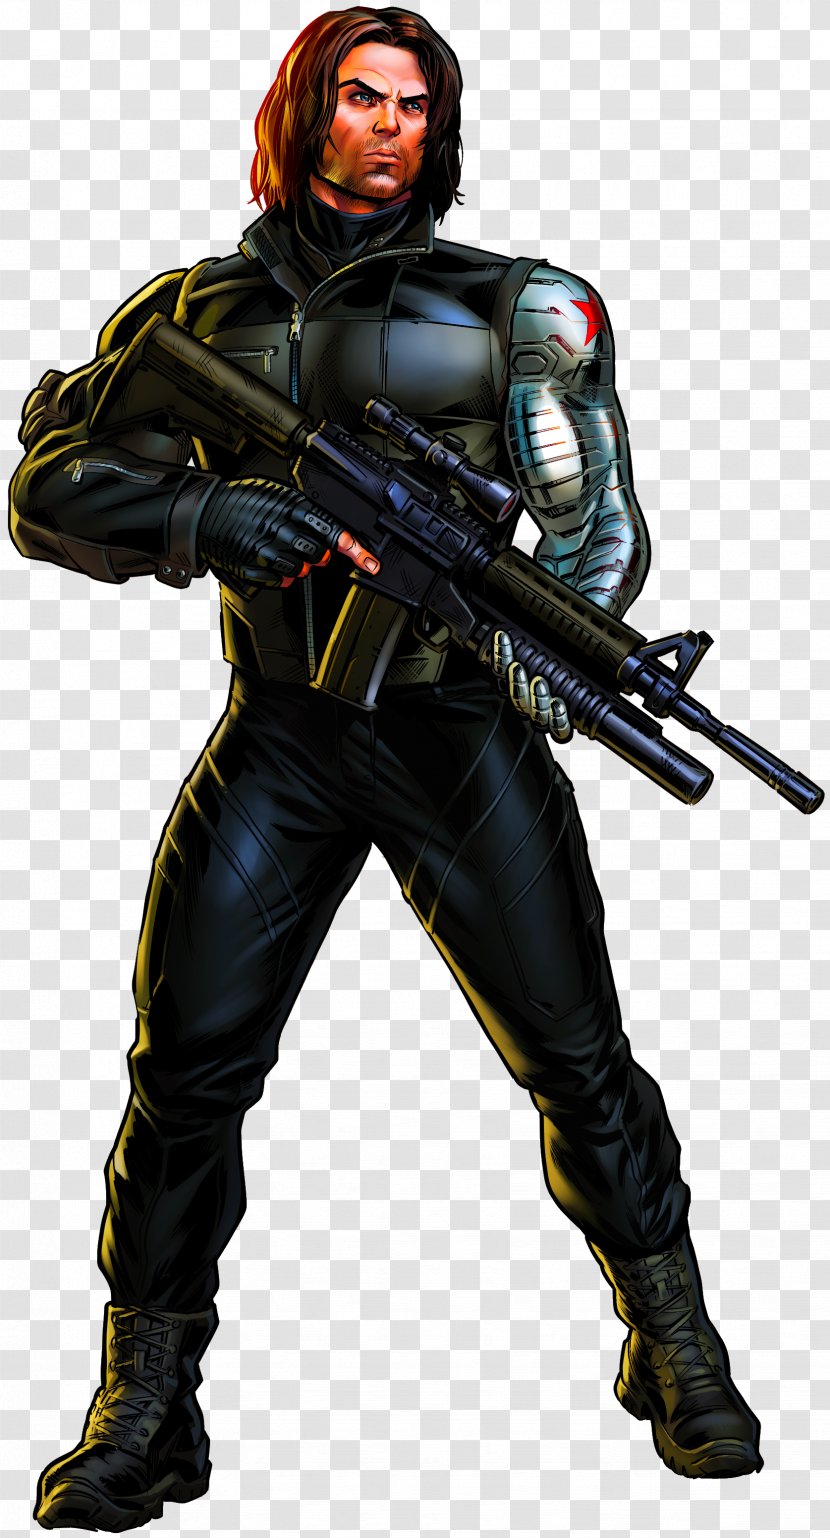 Marvel: Avengers Alliance Marvel Ultimate 2 Captain America: The Winter Soldier Bucky Barnes - Fictional Character Transparent PNG